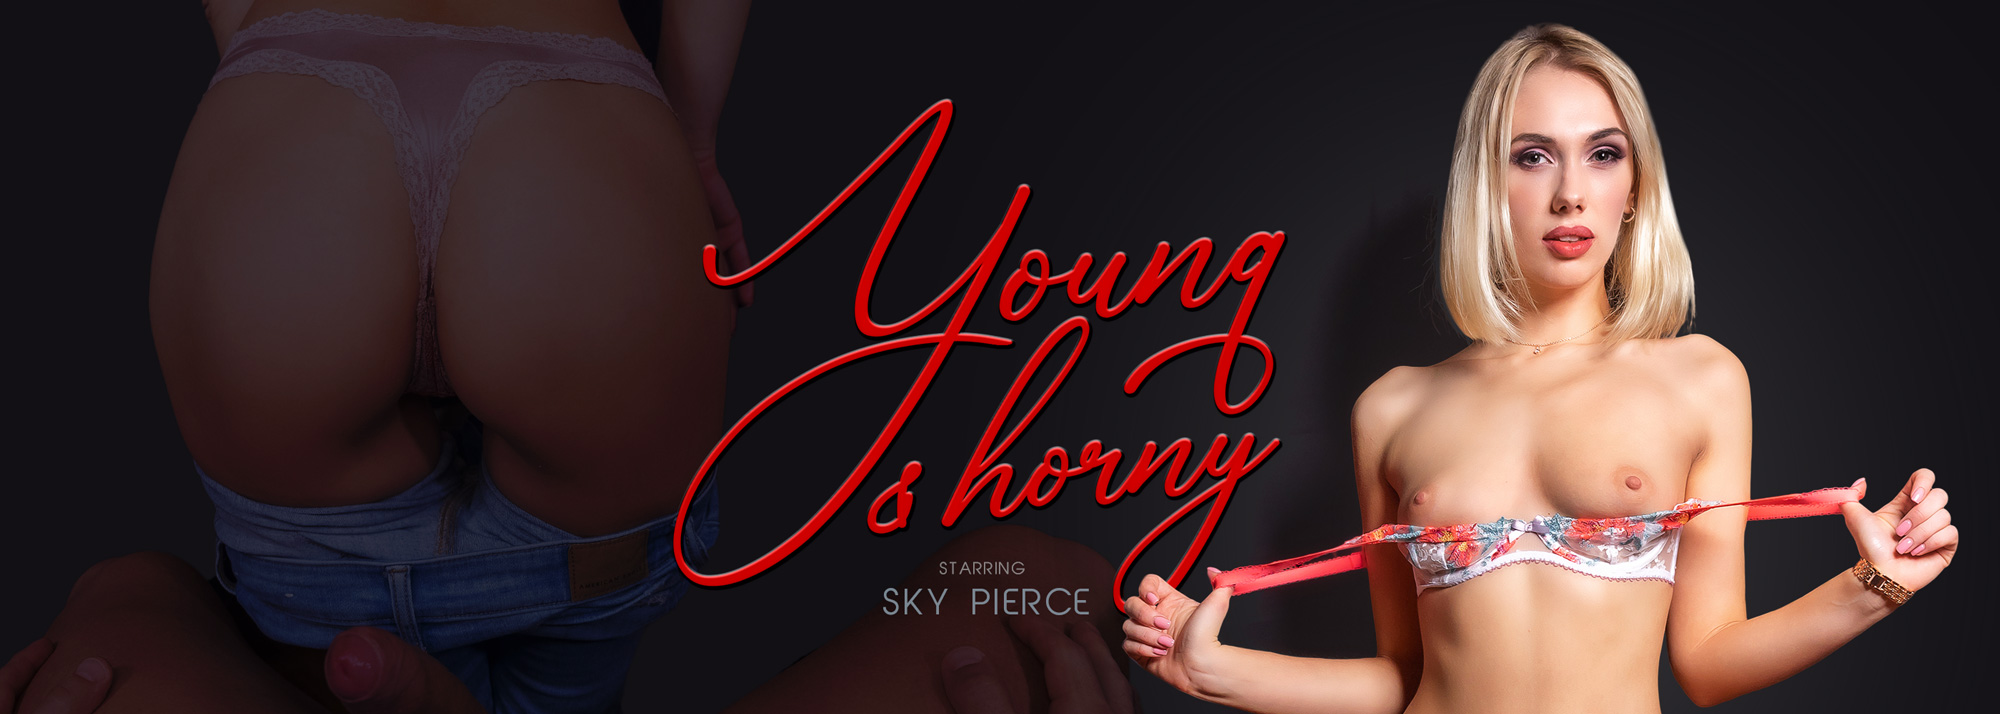 Young & Horny - VR Porn Video, Starring: Sky Pierce